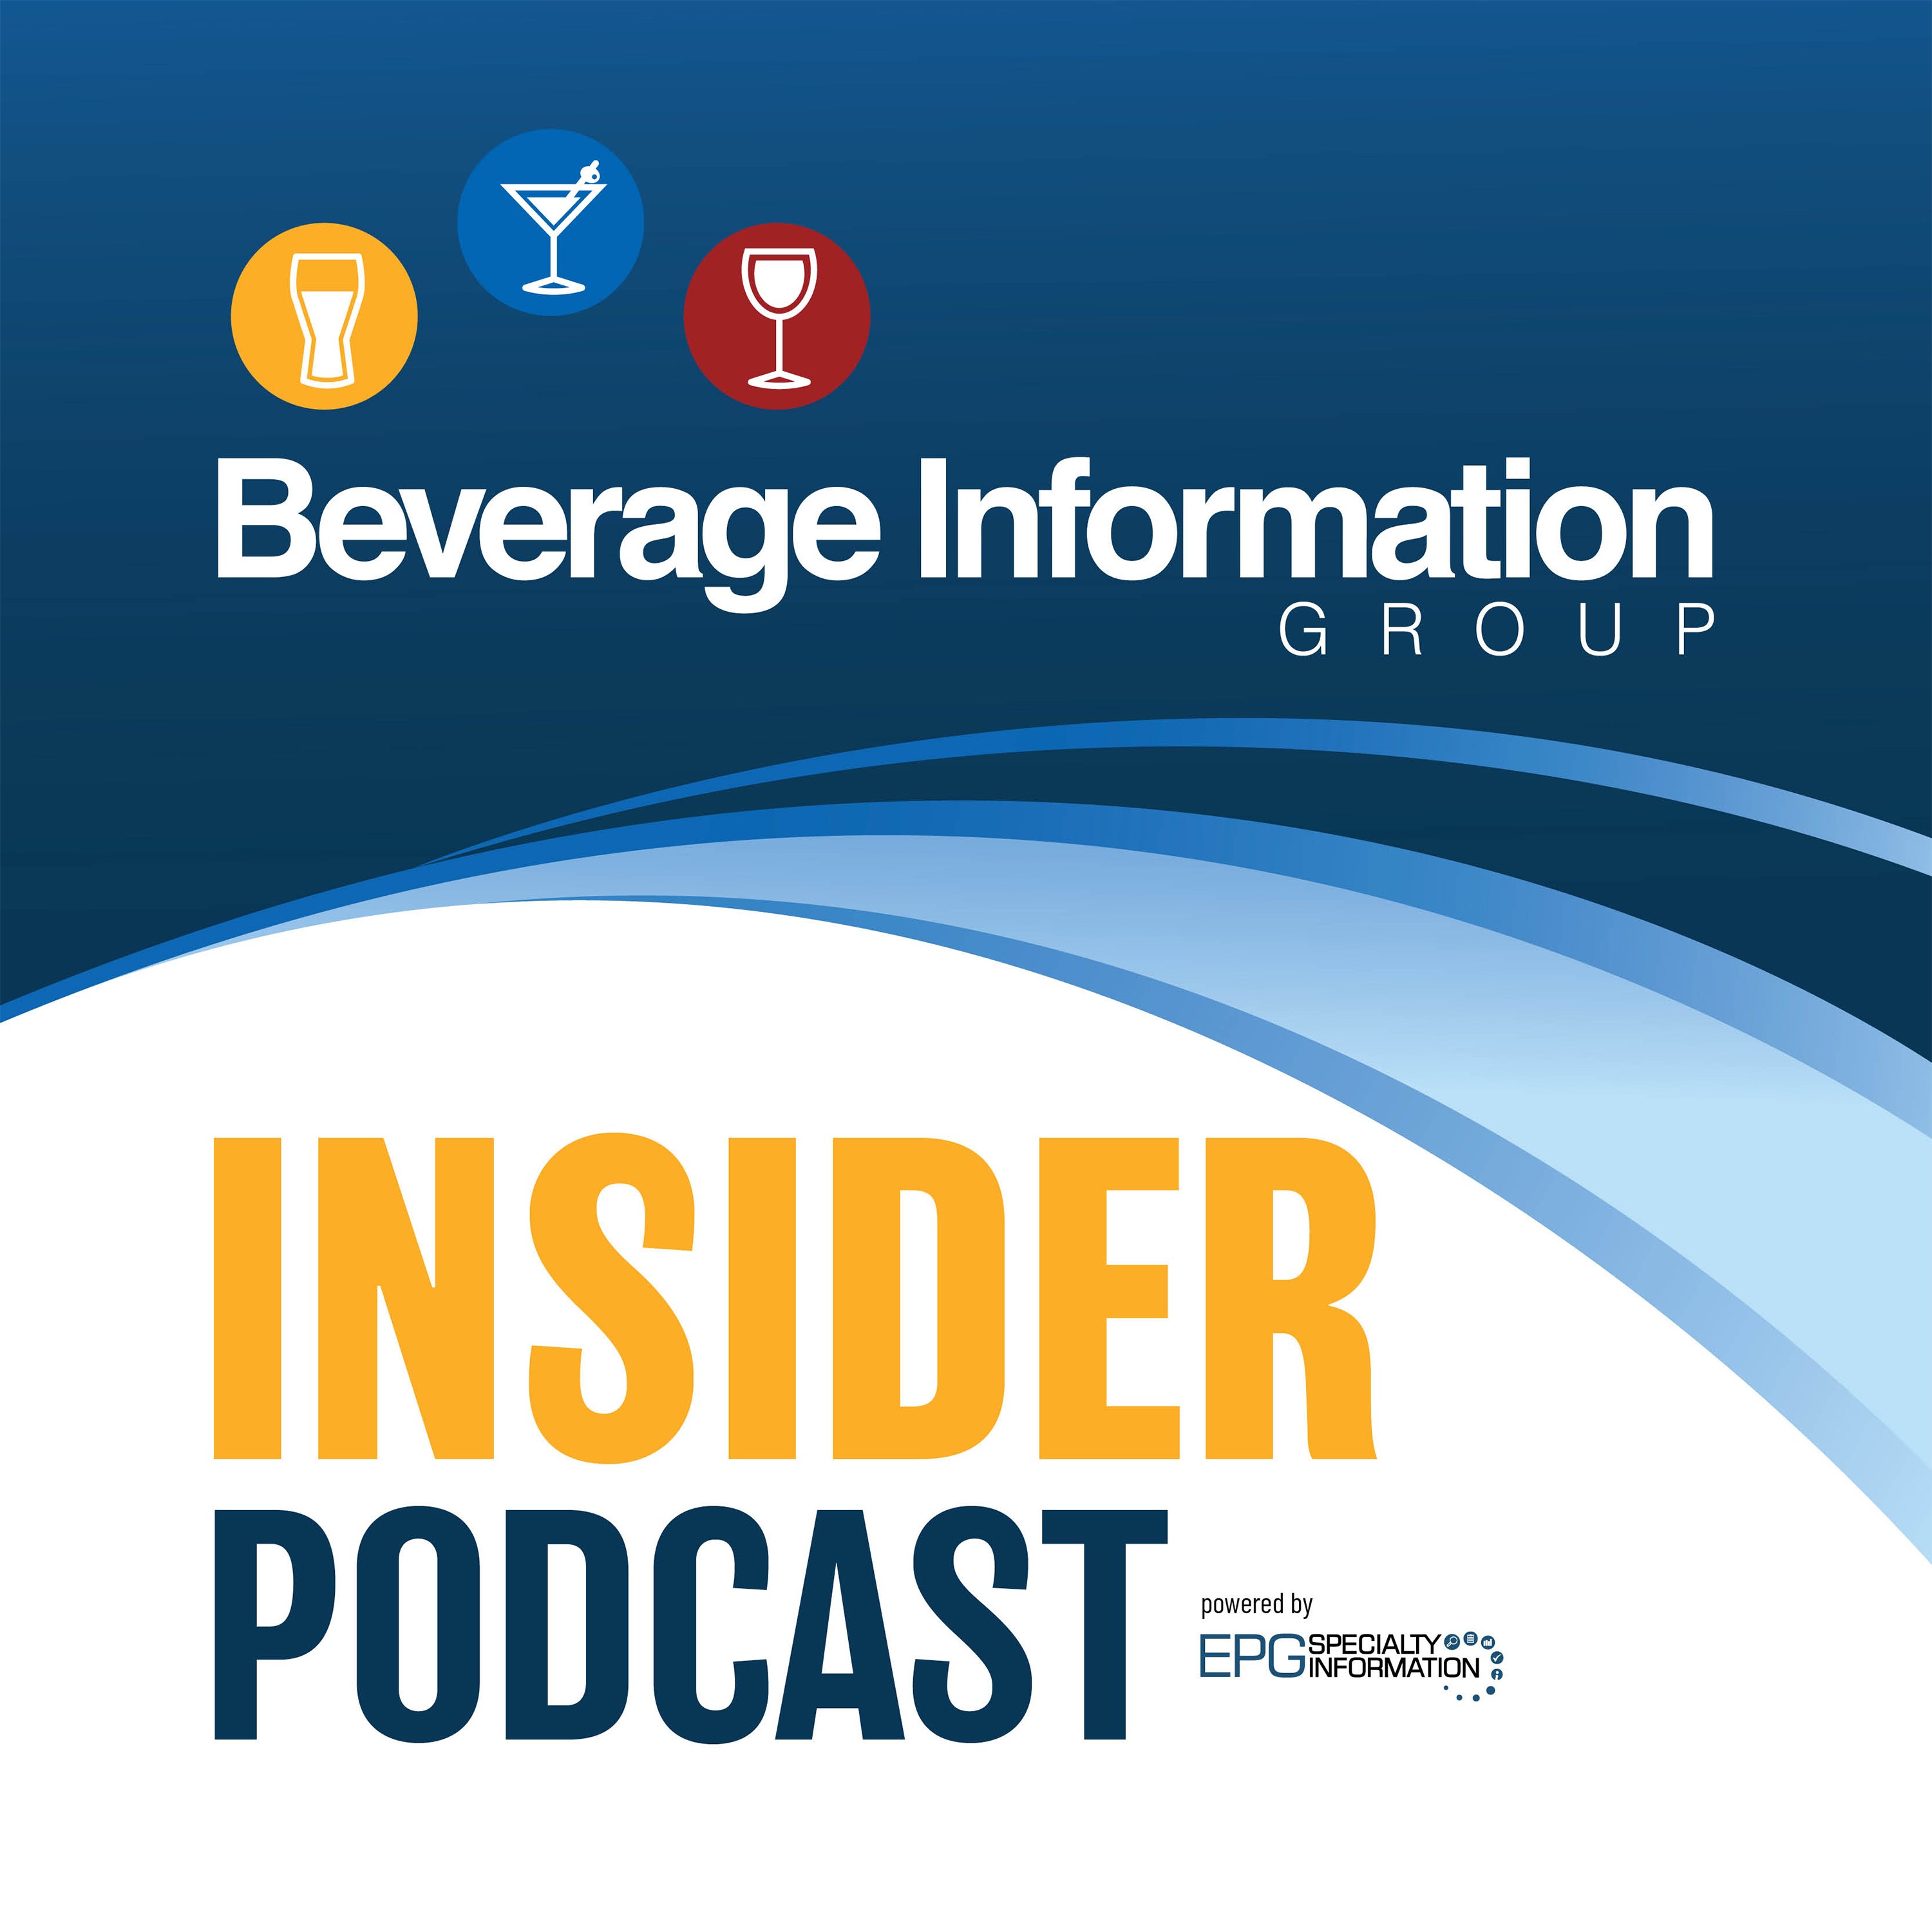 The Beverage Information Group Insider Podcast - Powered by EPG Specialty Information